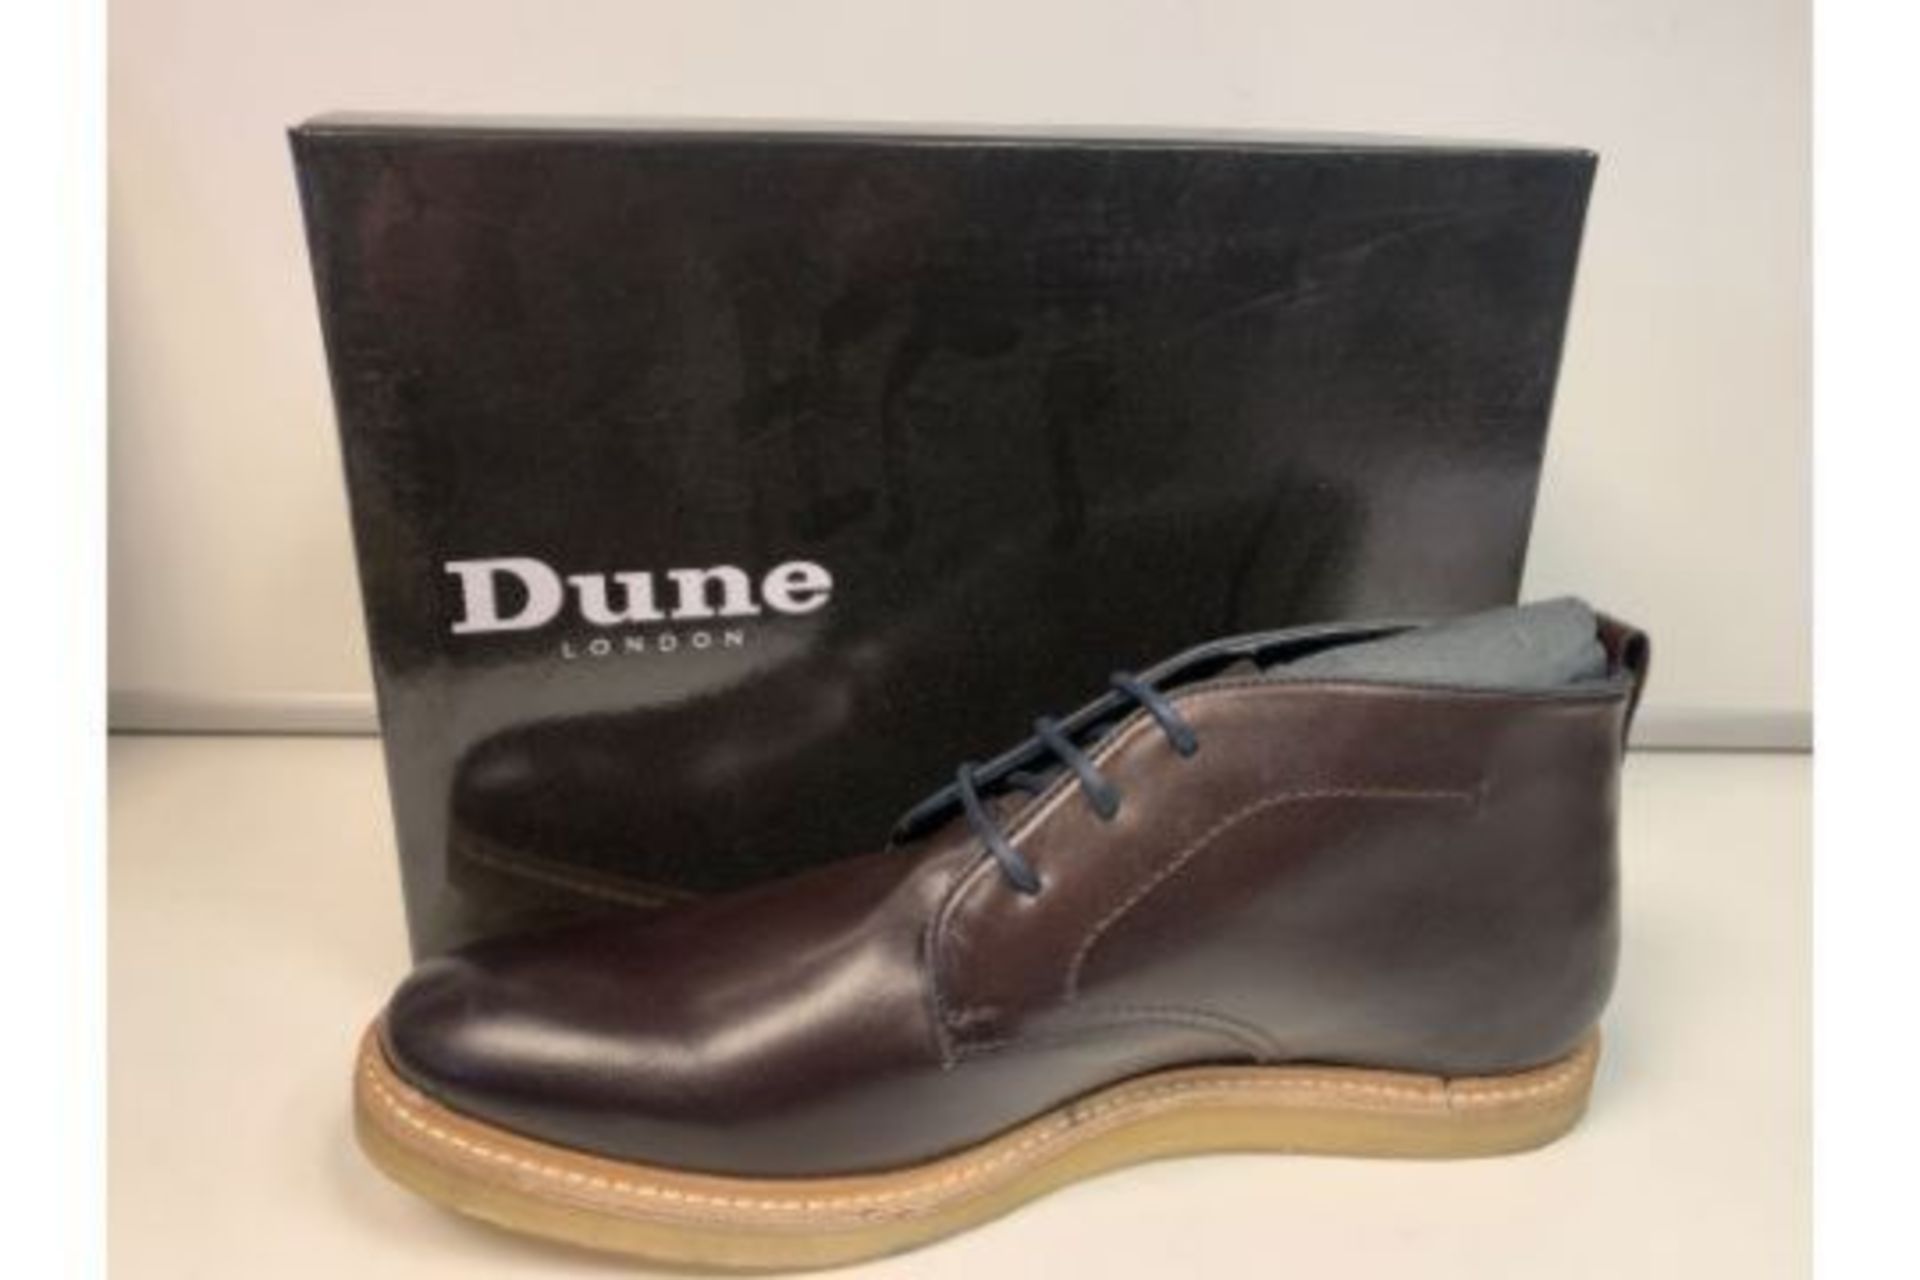 BRAND NEW DUNE DARK BROWN LEATHER BOOTS SIZE 10 RRP £129 - PCK